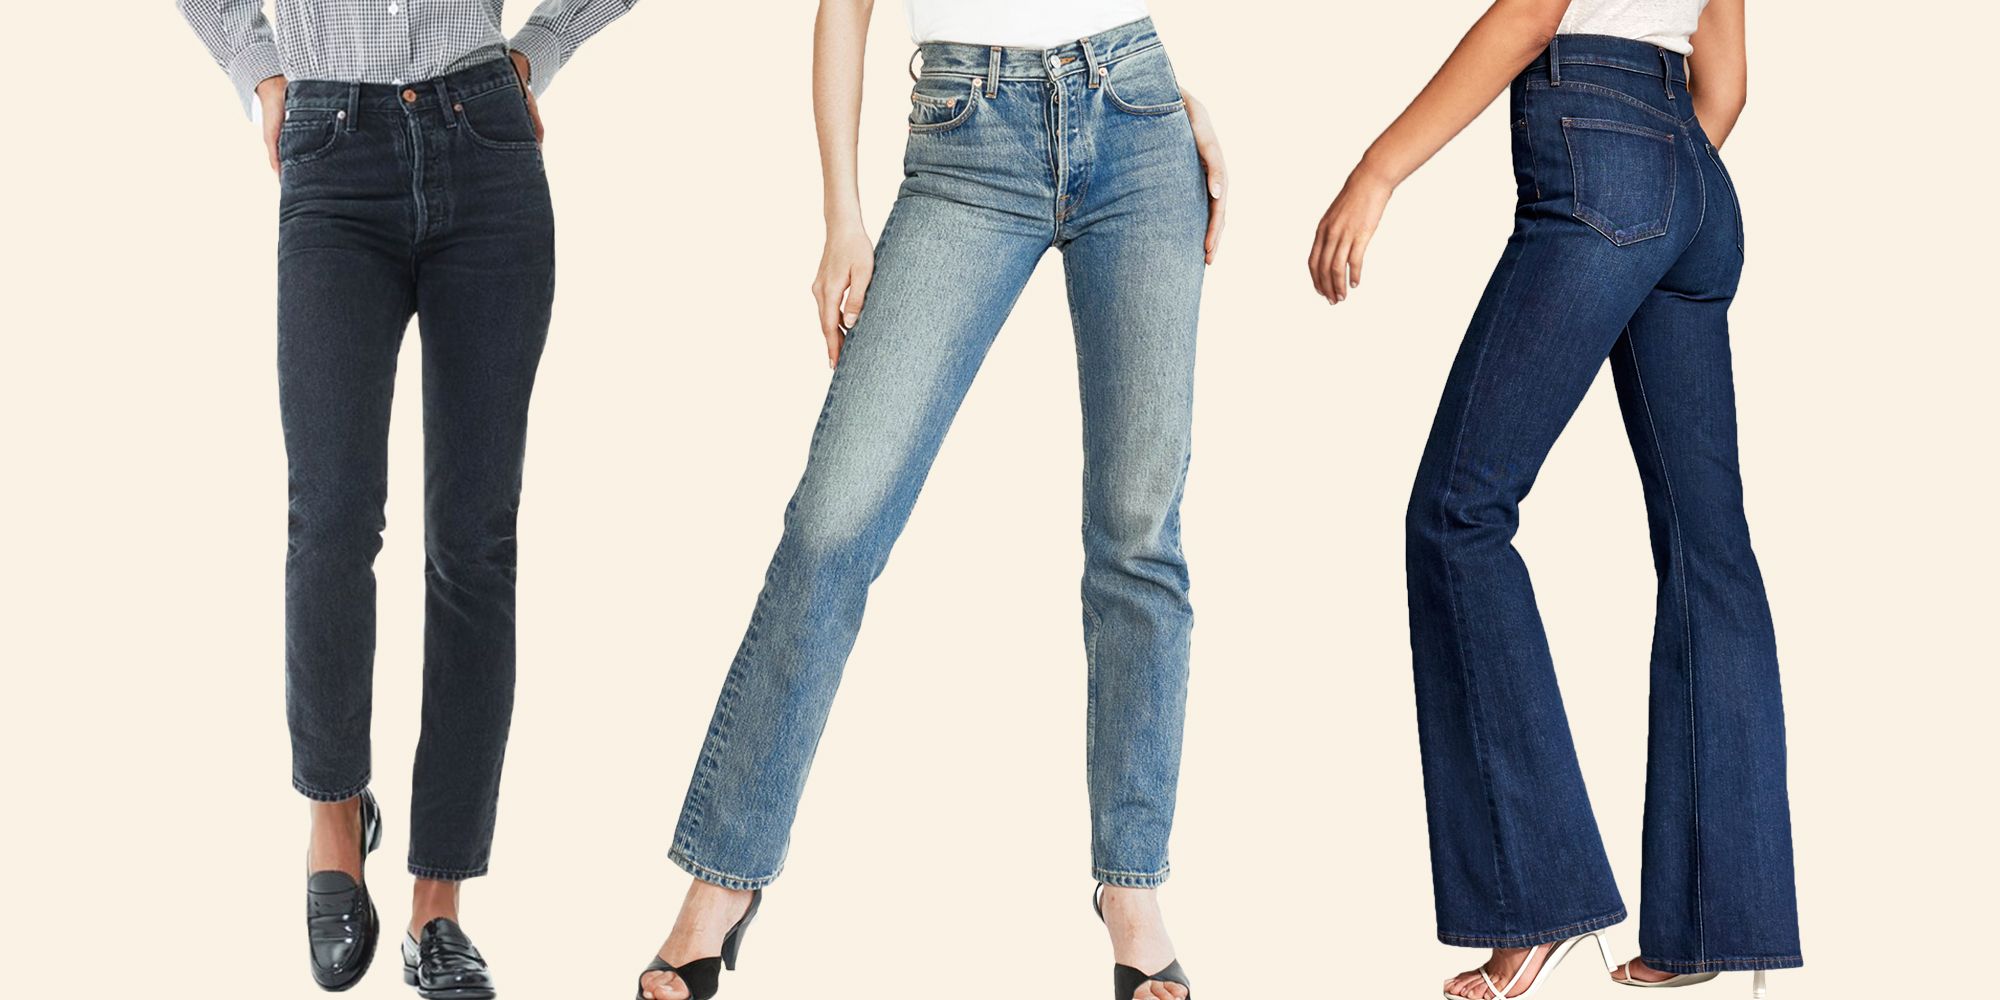 How to measure inseam women? An easy guide